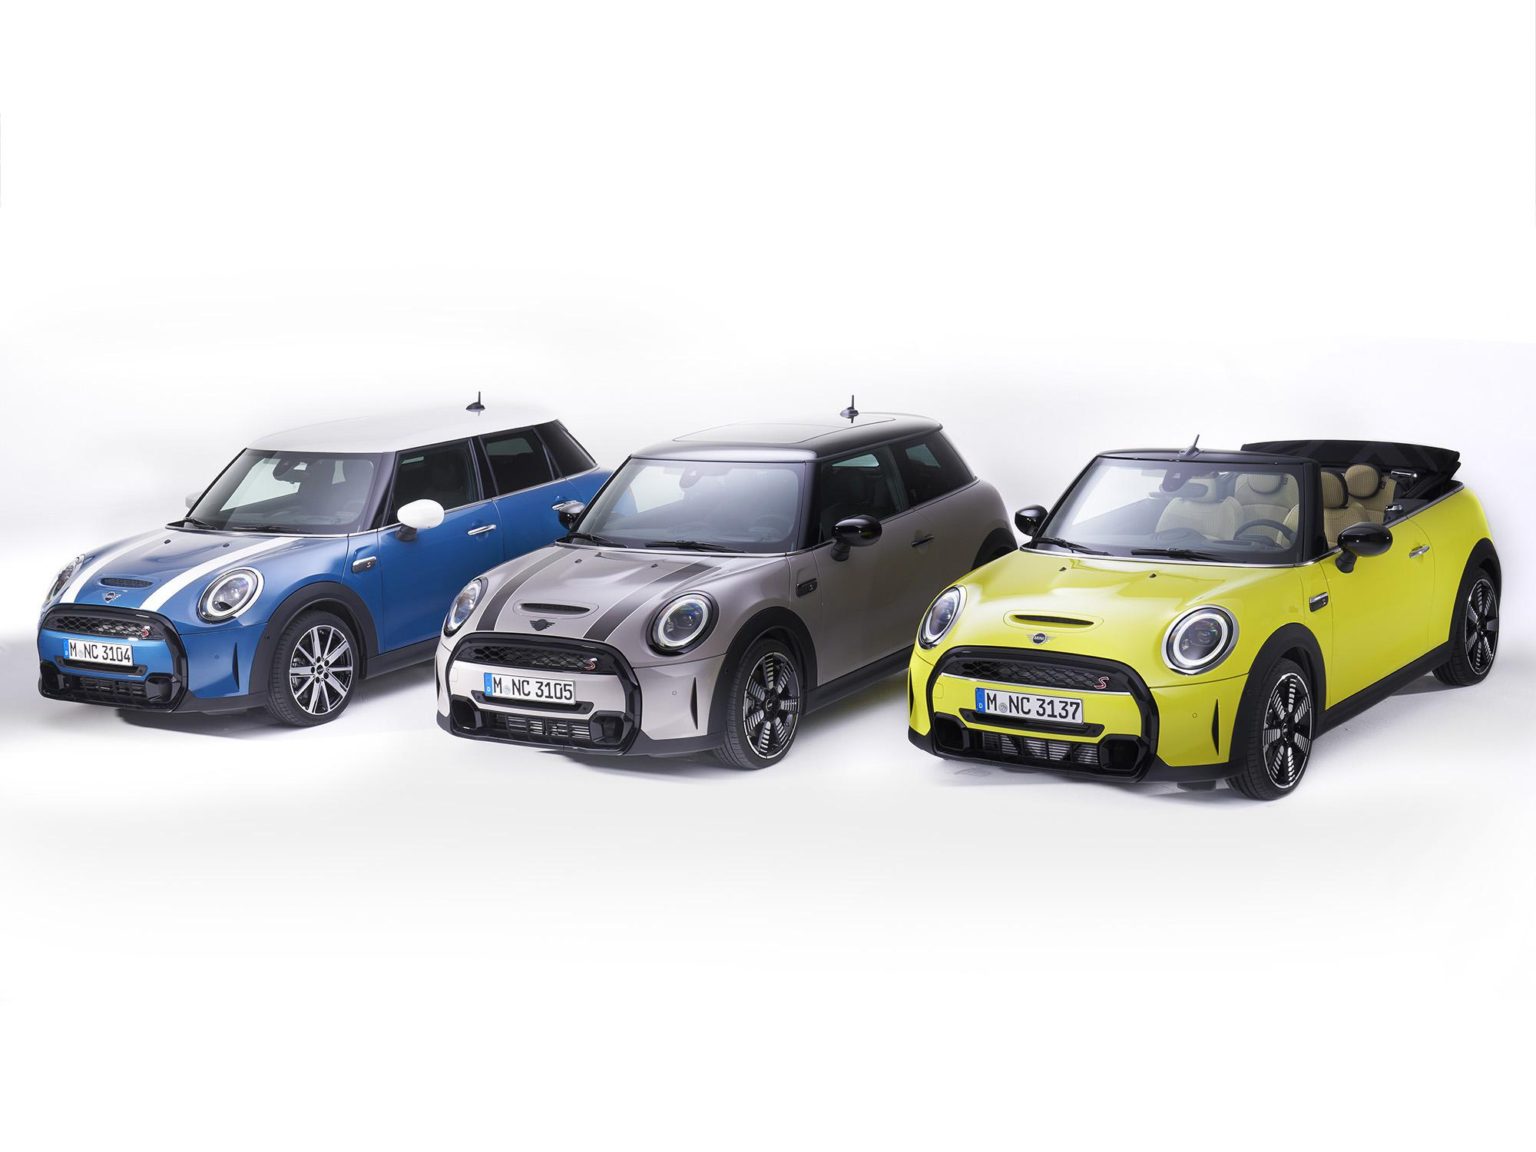 Three MINI models have been refreshed inside and out for the 2022 model year.